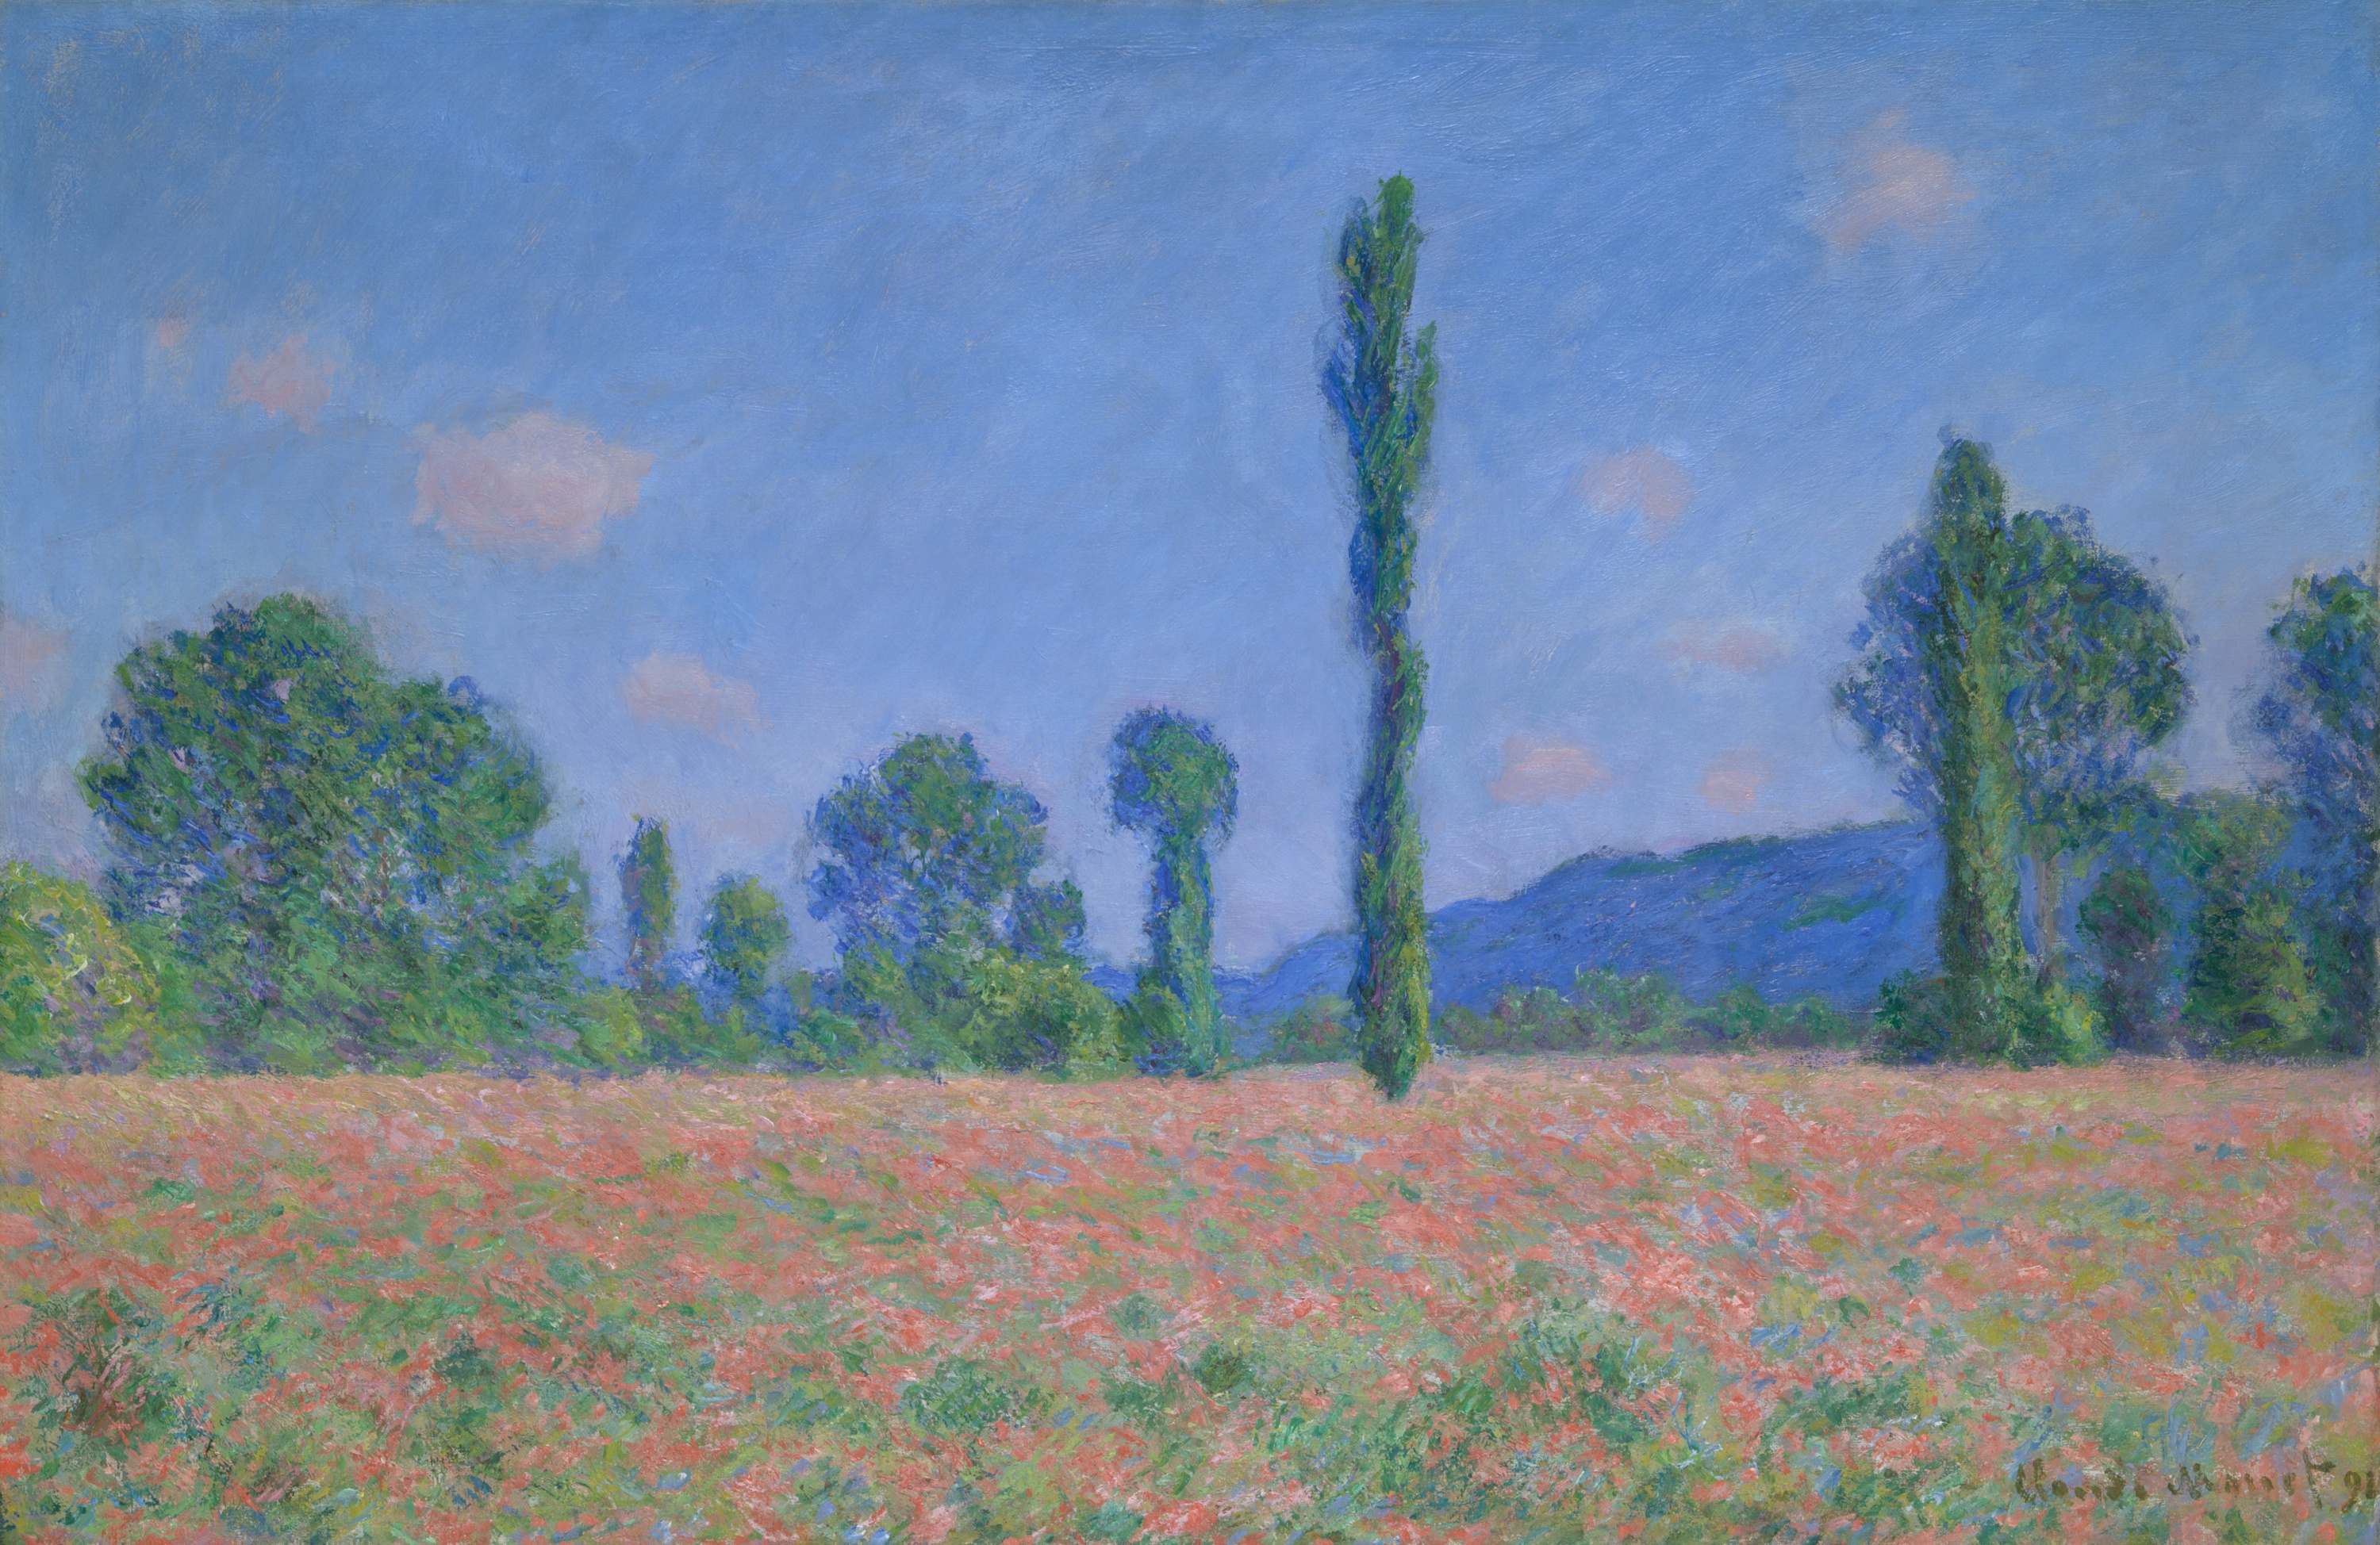 Campo di papaveri (Giverny) by Claude Monet - 1890/91 - 61,2 × 93,4 cm Art Institute of Chicago